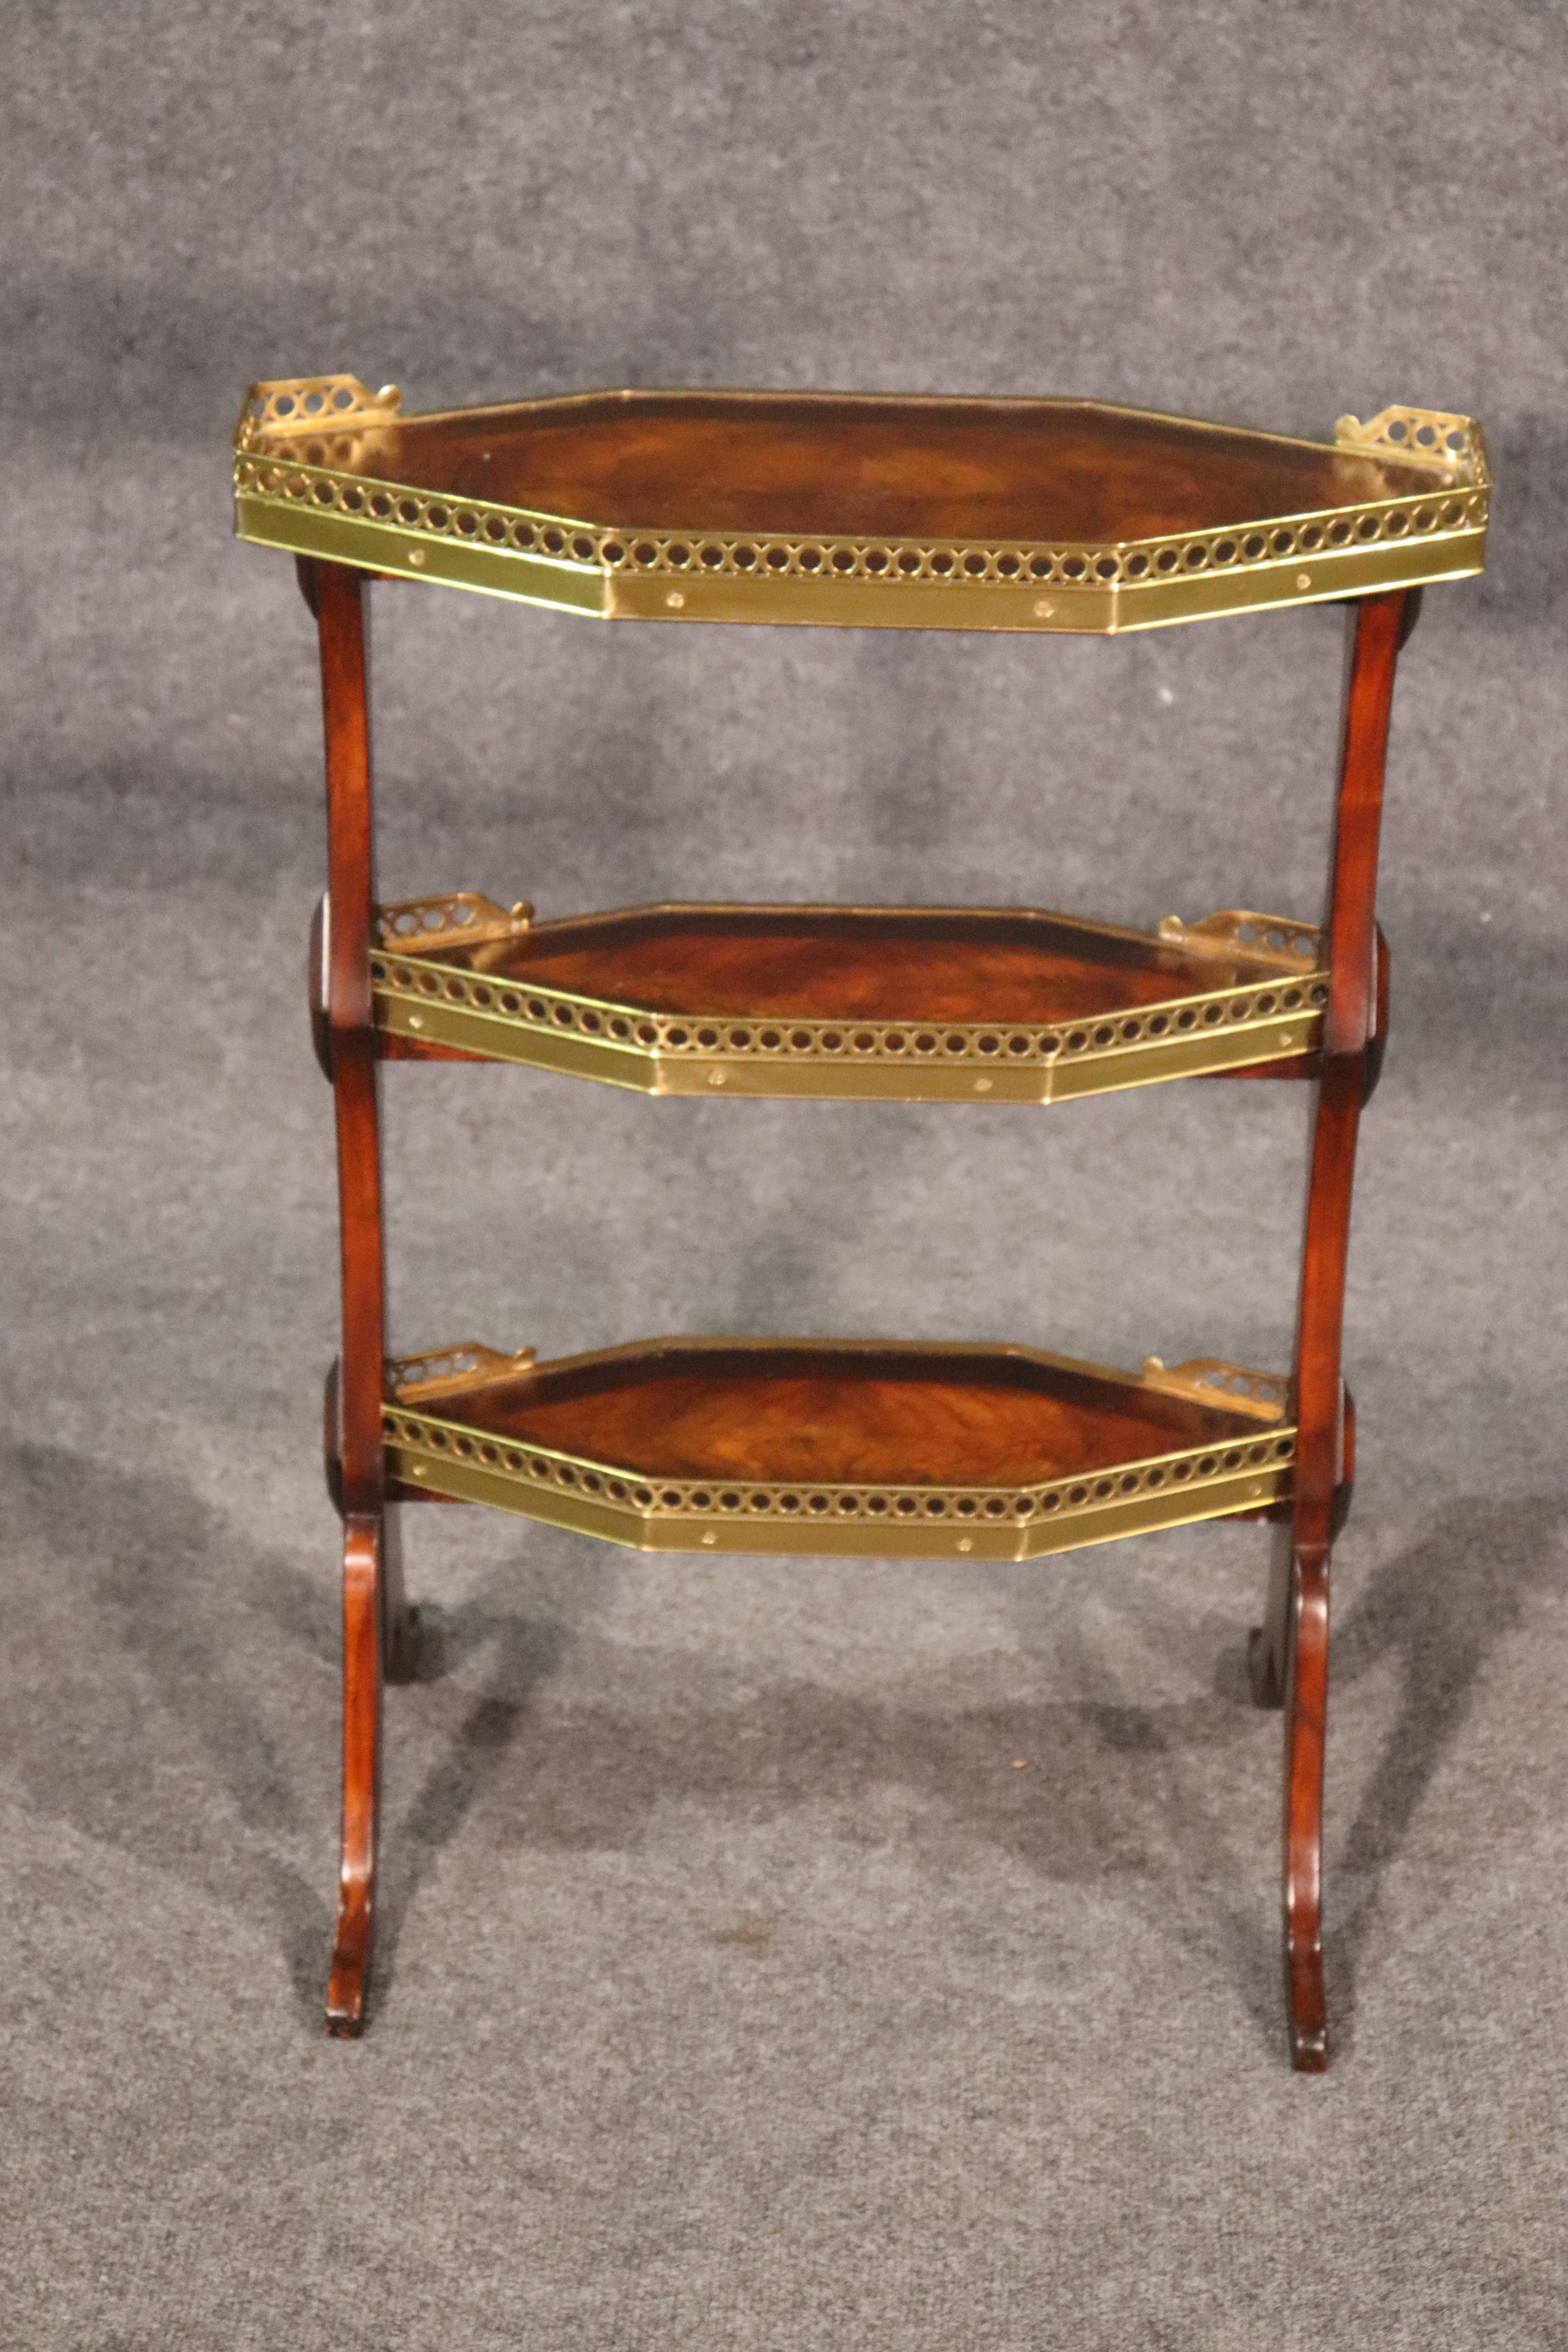 Mid-20th Century Solid Crotch Grain Walnut and Brass Trimmed English Regency Desert Stand Table